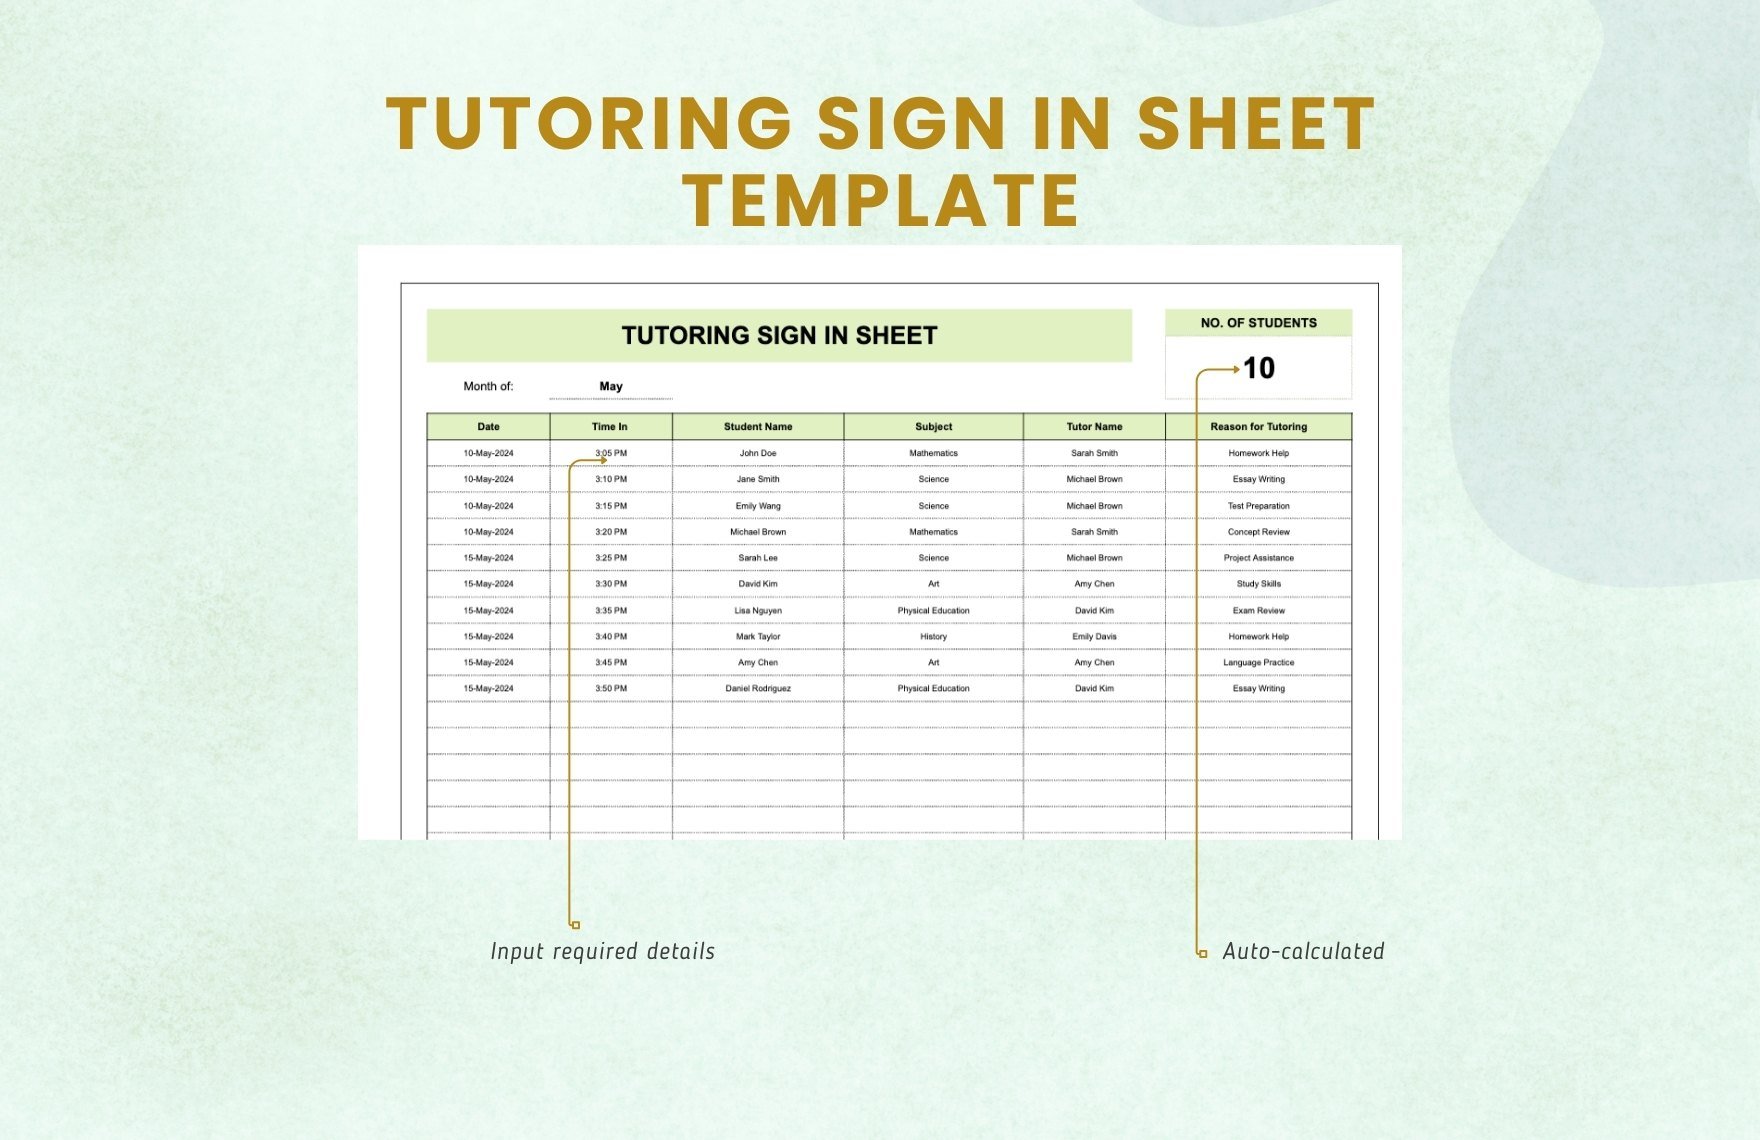 Tutoring Sign in Sheet Template